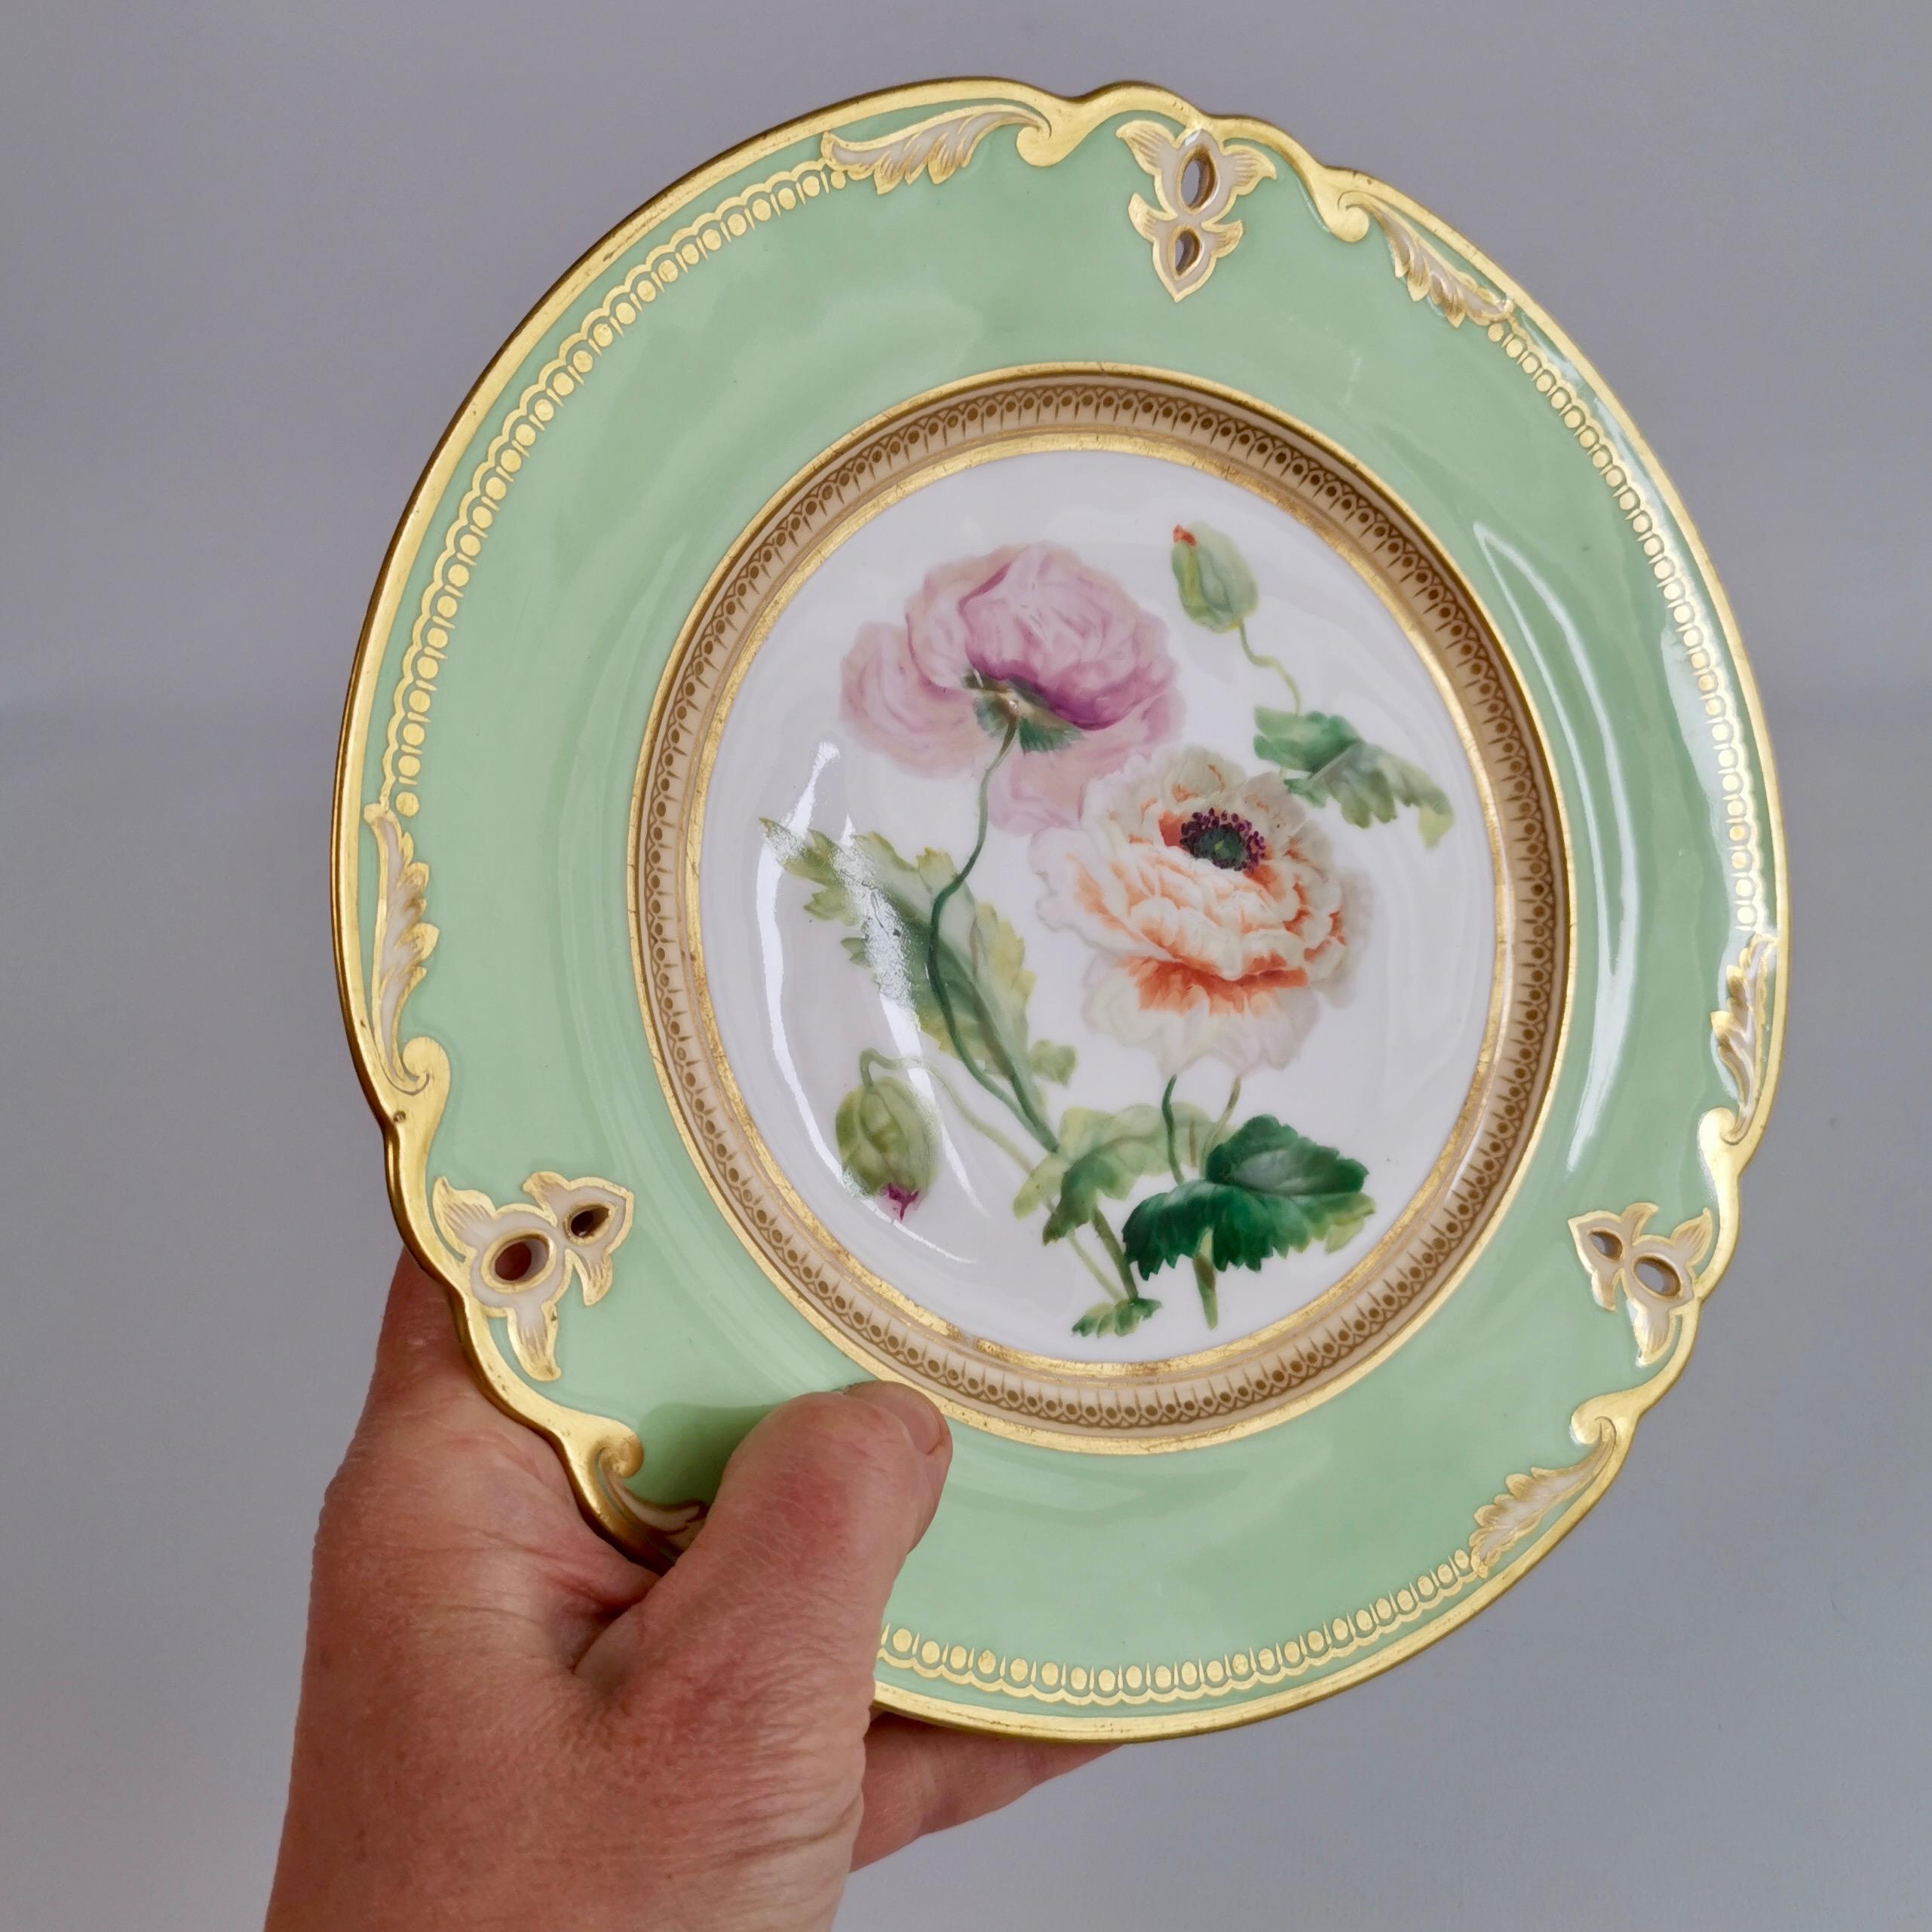 This is a beautiful dessert plate made by Samuel Alcock around the year 1855. The plate has a pierced rim and is decorated with a pale green ground and beautifully hand painted and named ranunculae in the centre.

Samuel Alcock was one of the many